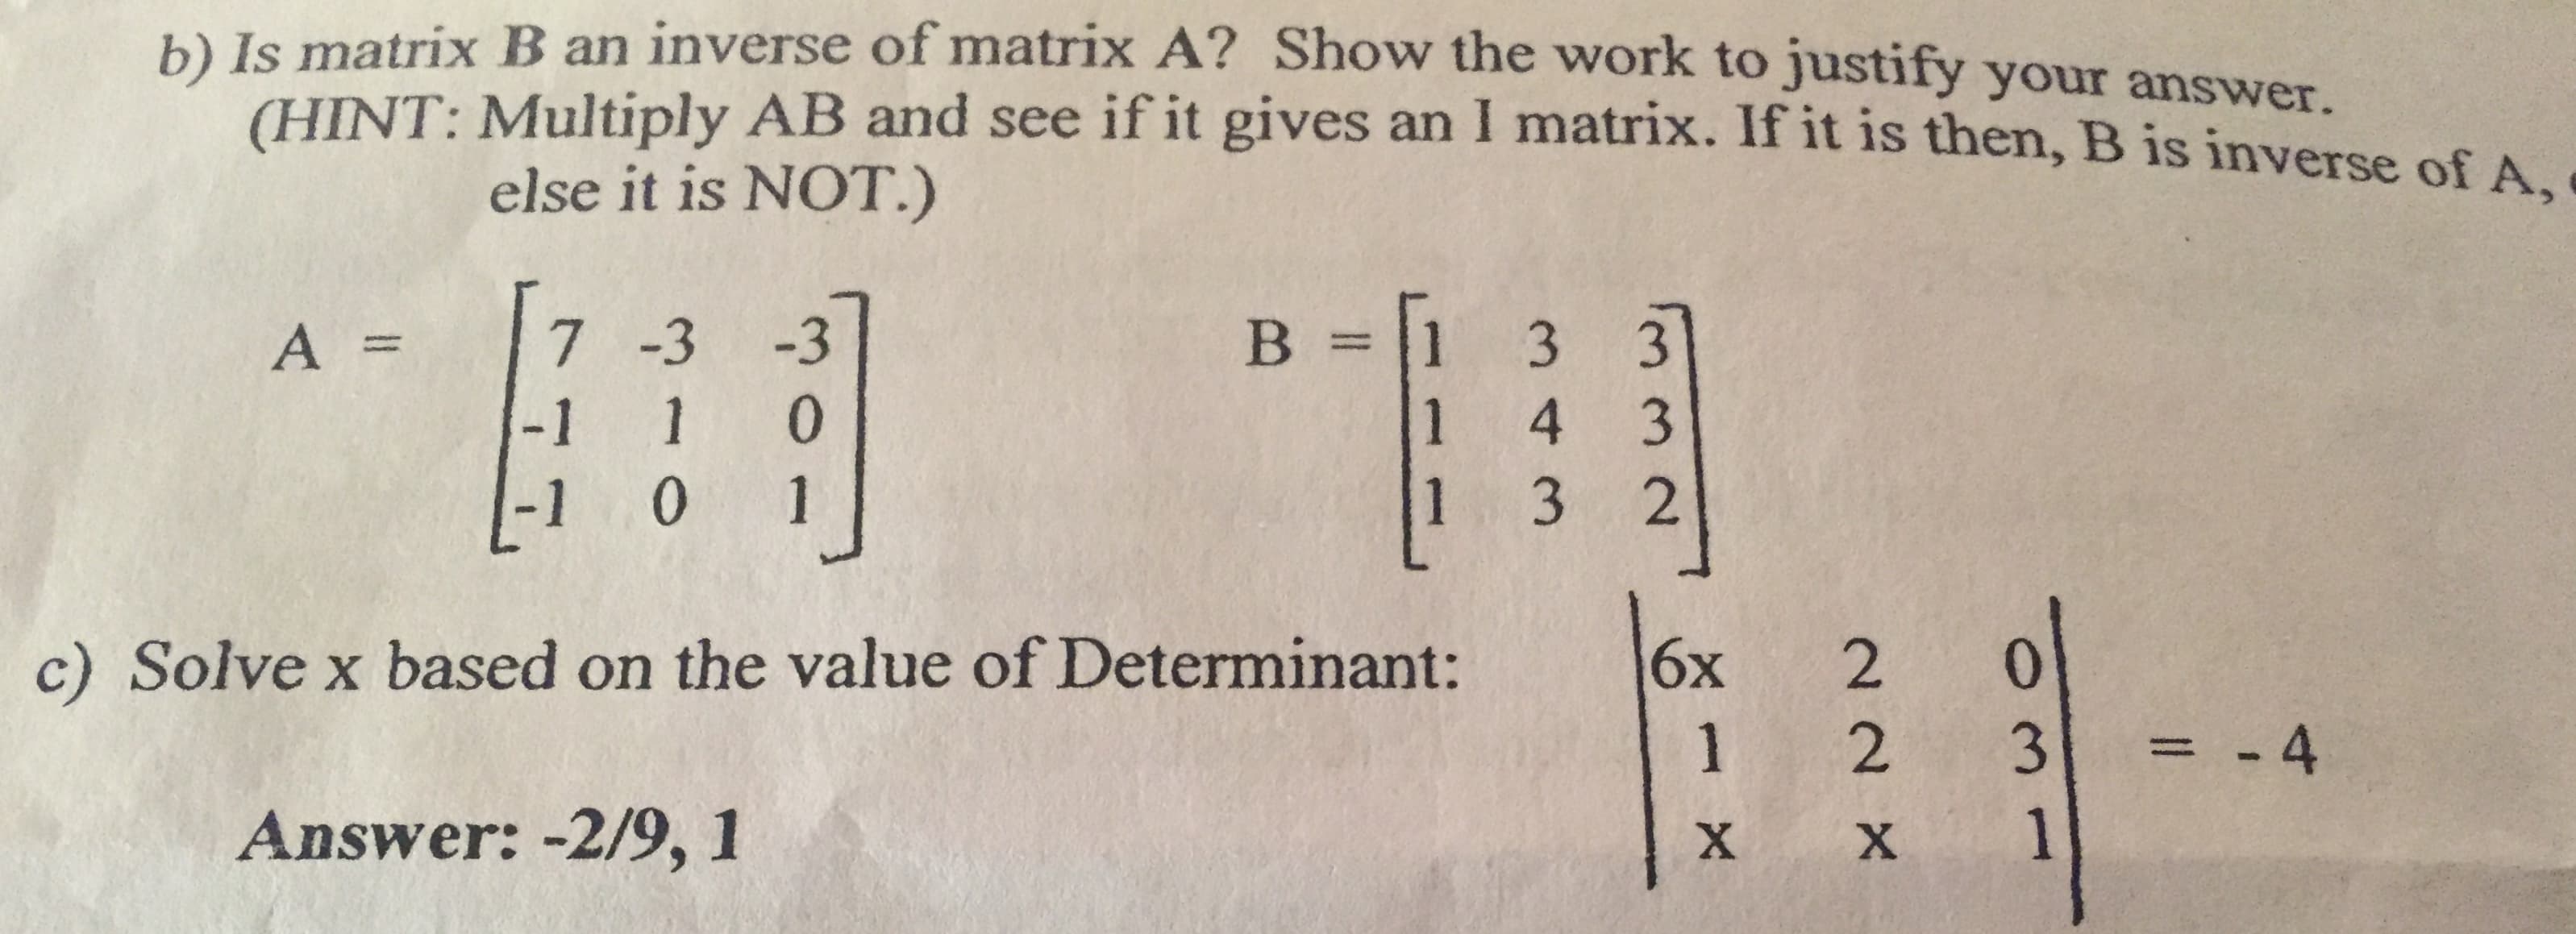 b) Is matrix B an inverse of matrix A? Show the work to justify your answer.
CHINT: Multiply AB and see if it gives an I matrix. If it is then, B is inverse of A
else it is NOT.)
В %3
-3
7 -3
3
3
A =
1 0
-1
1
4 3
2
1 3
-1 0 1
c) Solve x based on the value of Determinant:
6х
2
0
= -4
2
1
3
Answer: -2/9, 1
1
X
X
